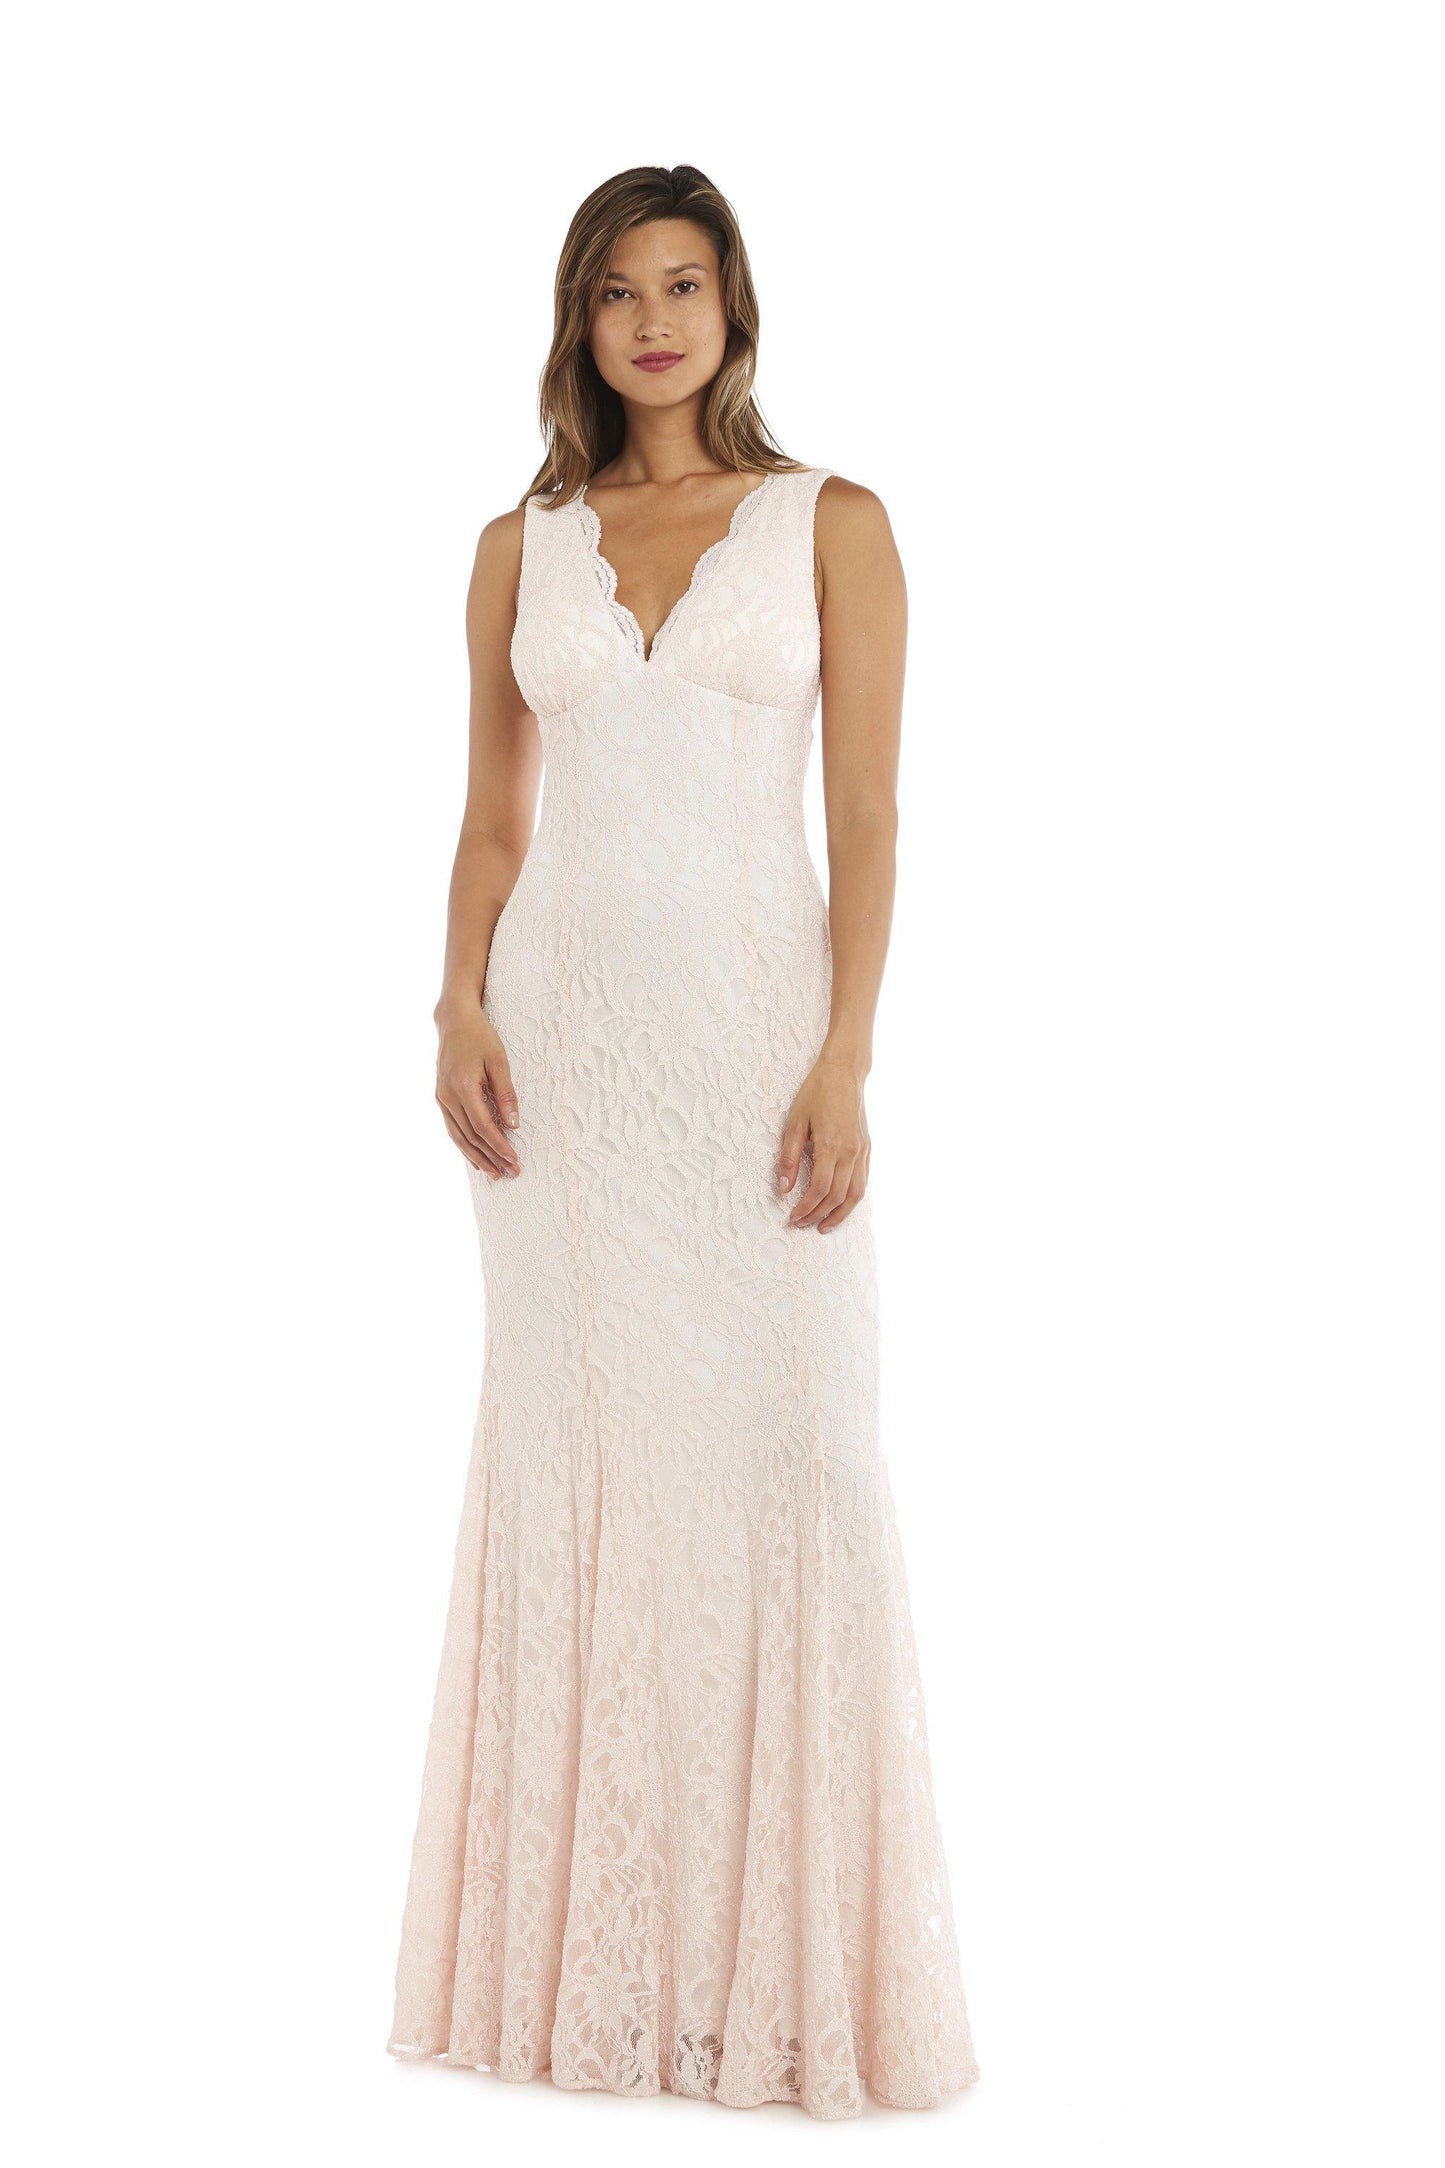 Morgan & Co Lace Long Formal Dress 12443 - The Dress Outlet